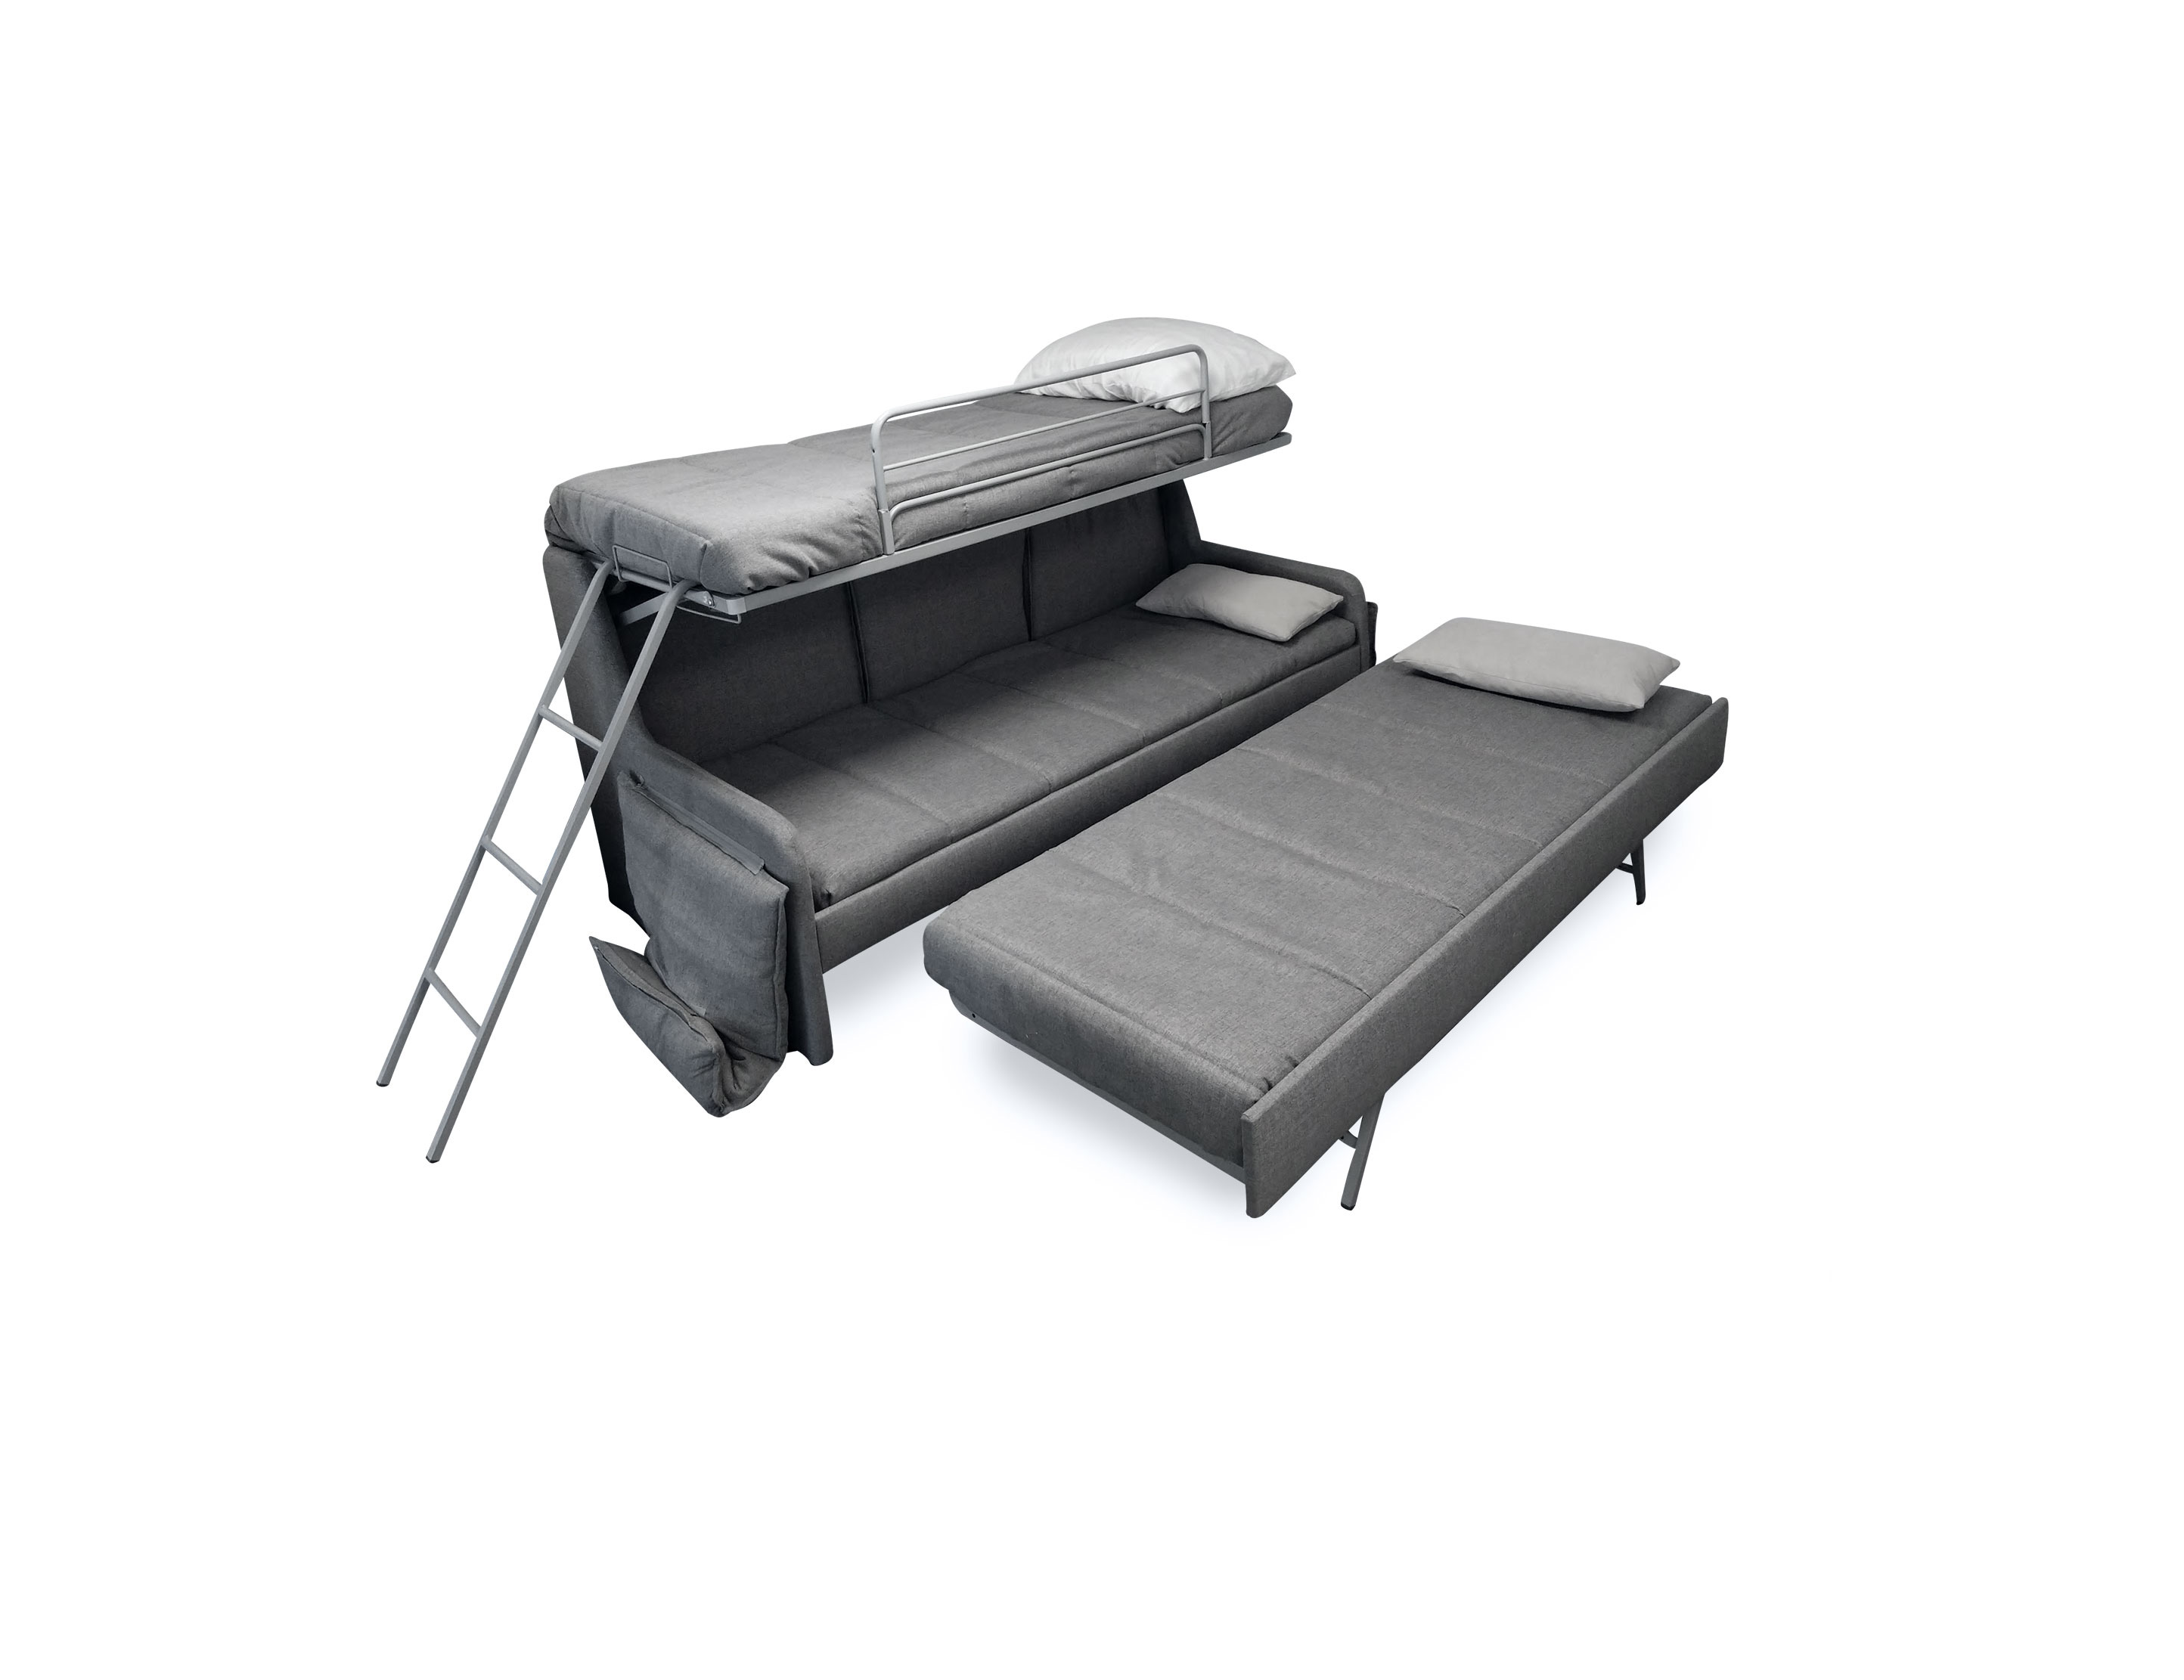 Transforming Sofa Bunk Bed Expand, Bunk Beds That Convert To Twin